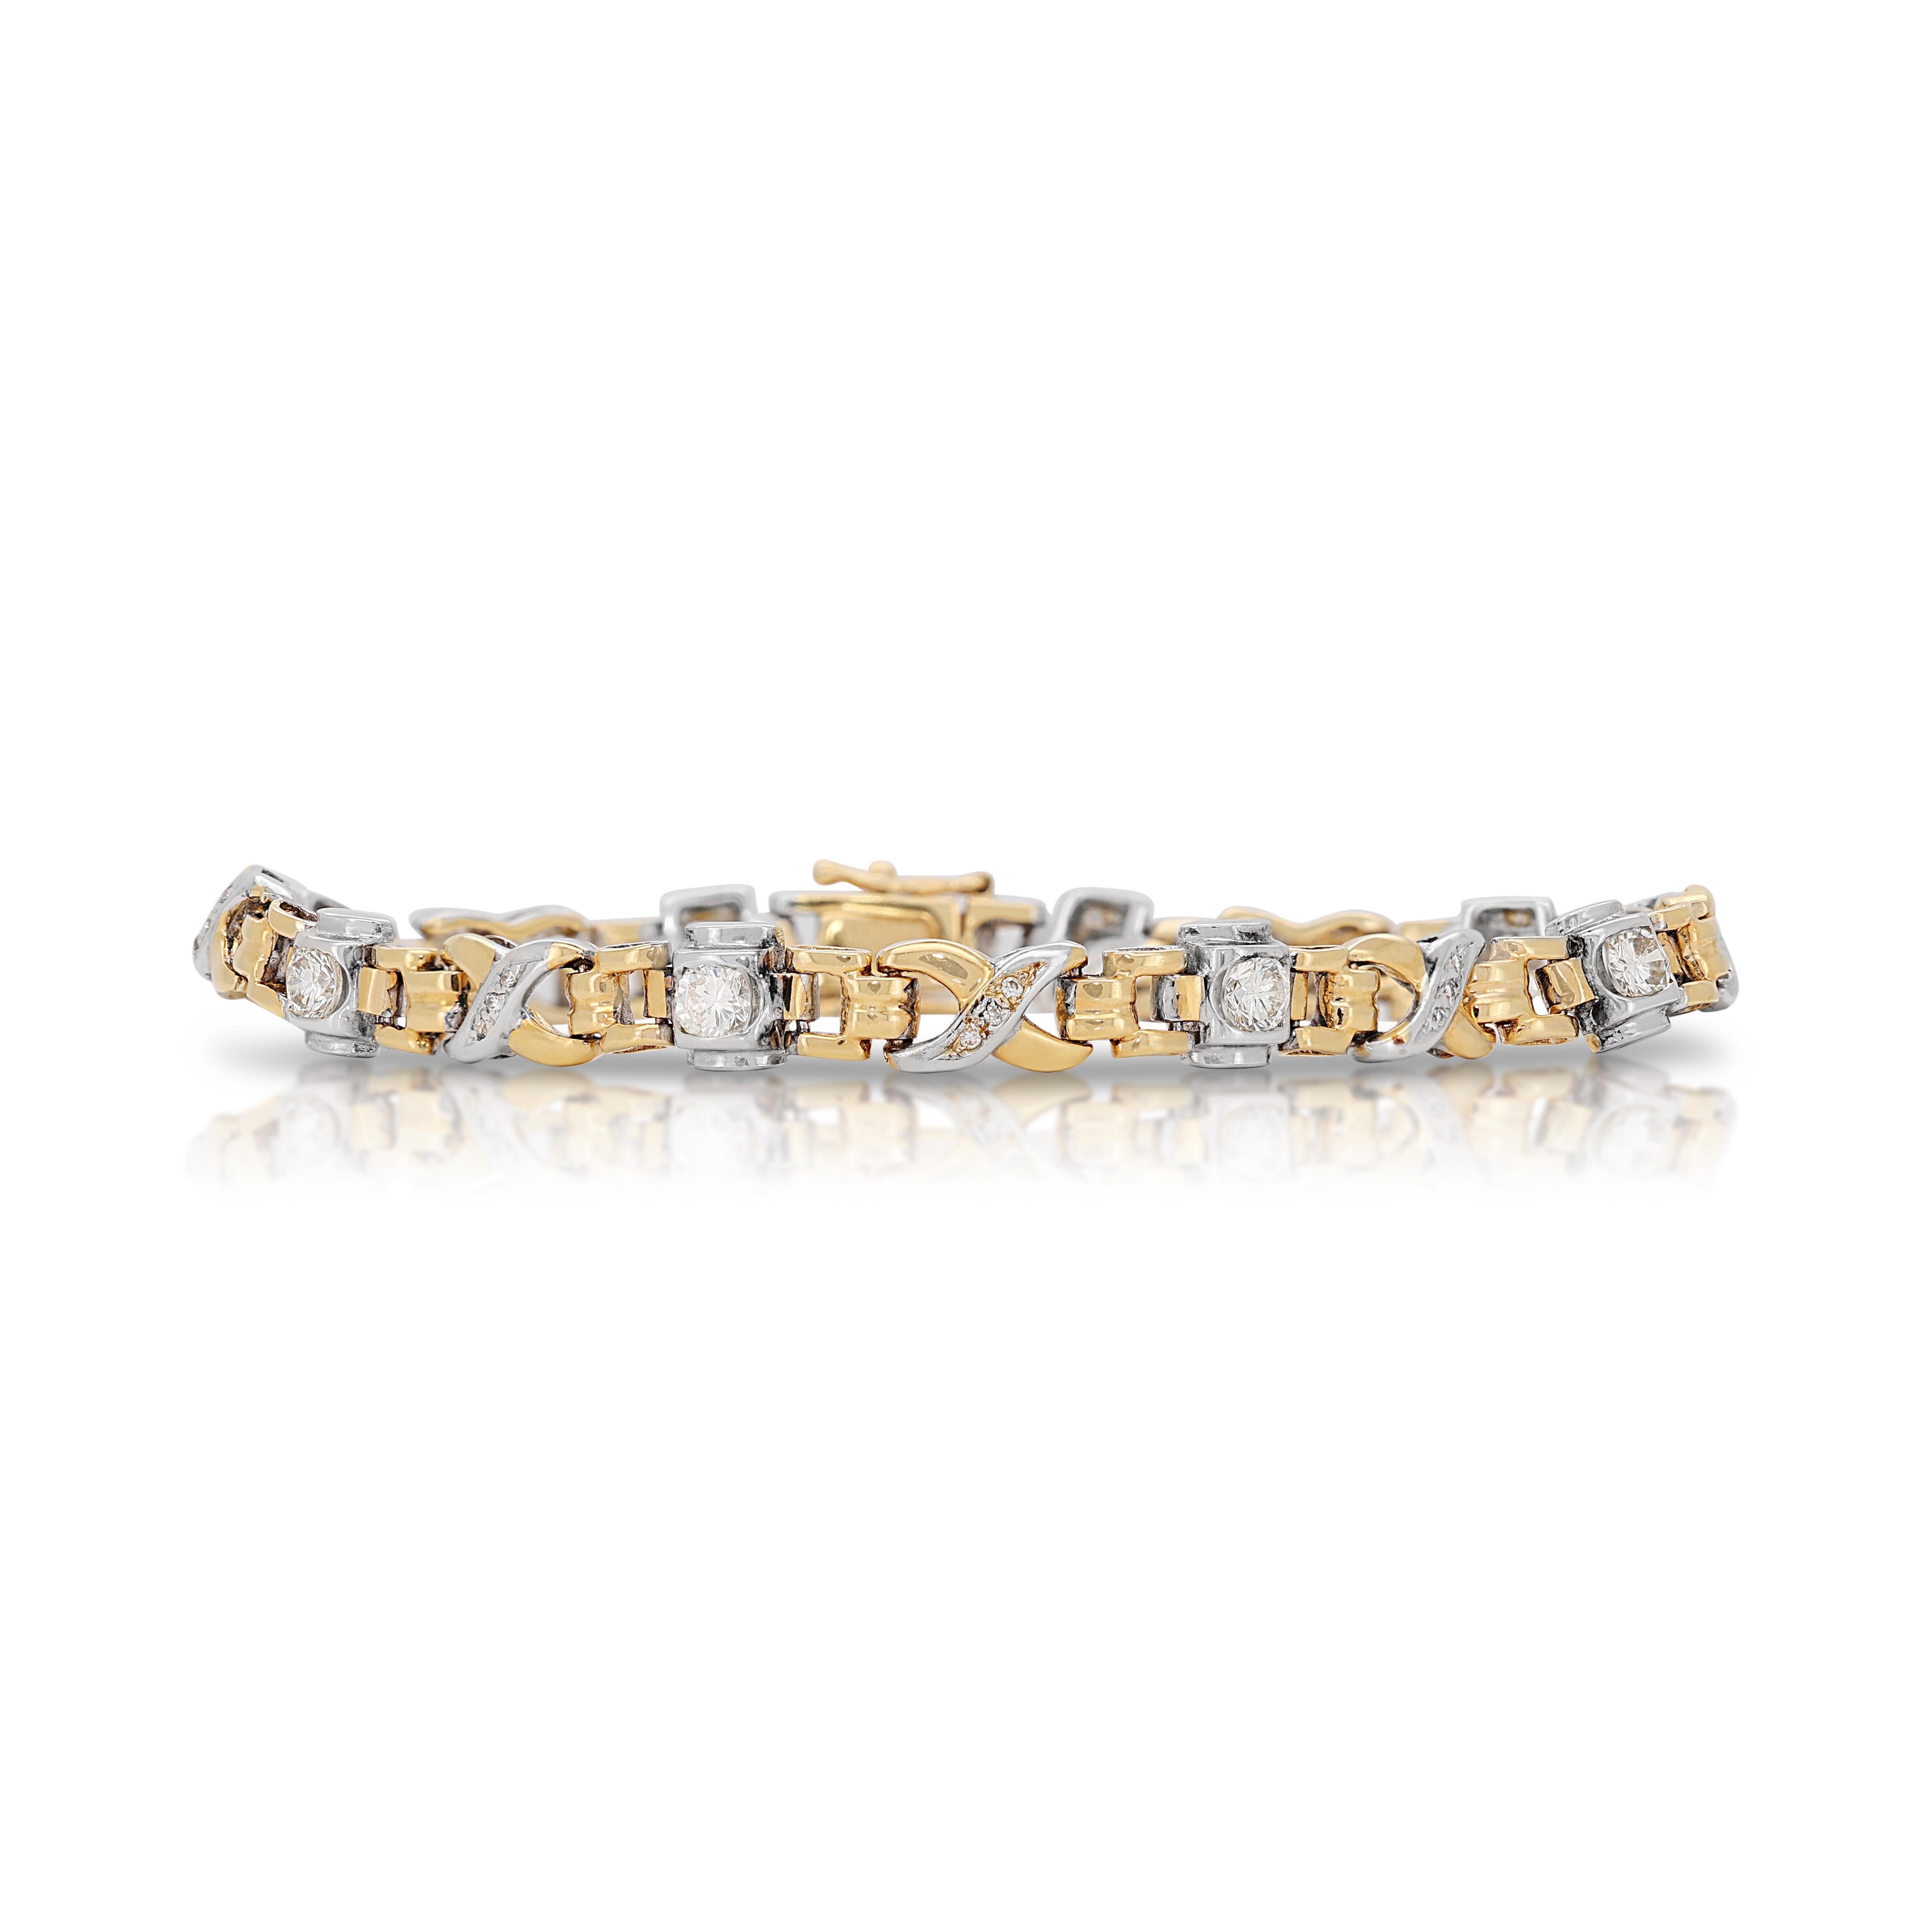 Exquisite 1.44ct Diamonds Bracelet in 18K White and Yellow Gold In Excellent Condition For Sale In רמת גן, IL